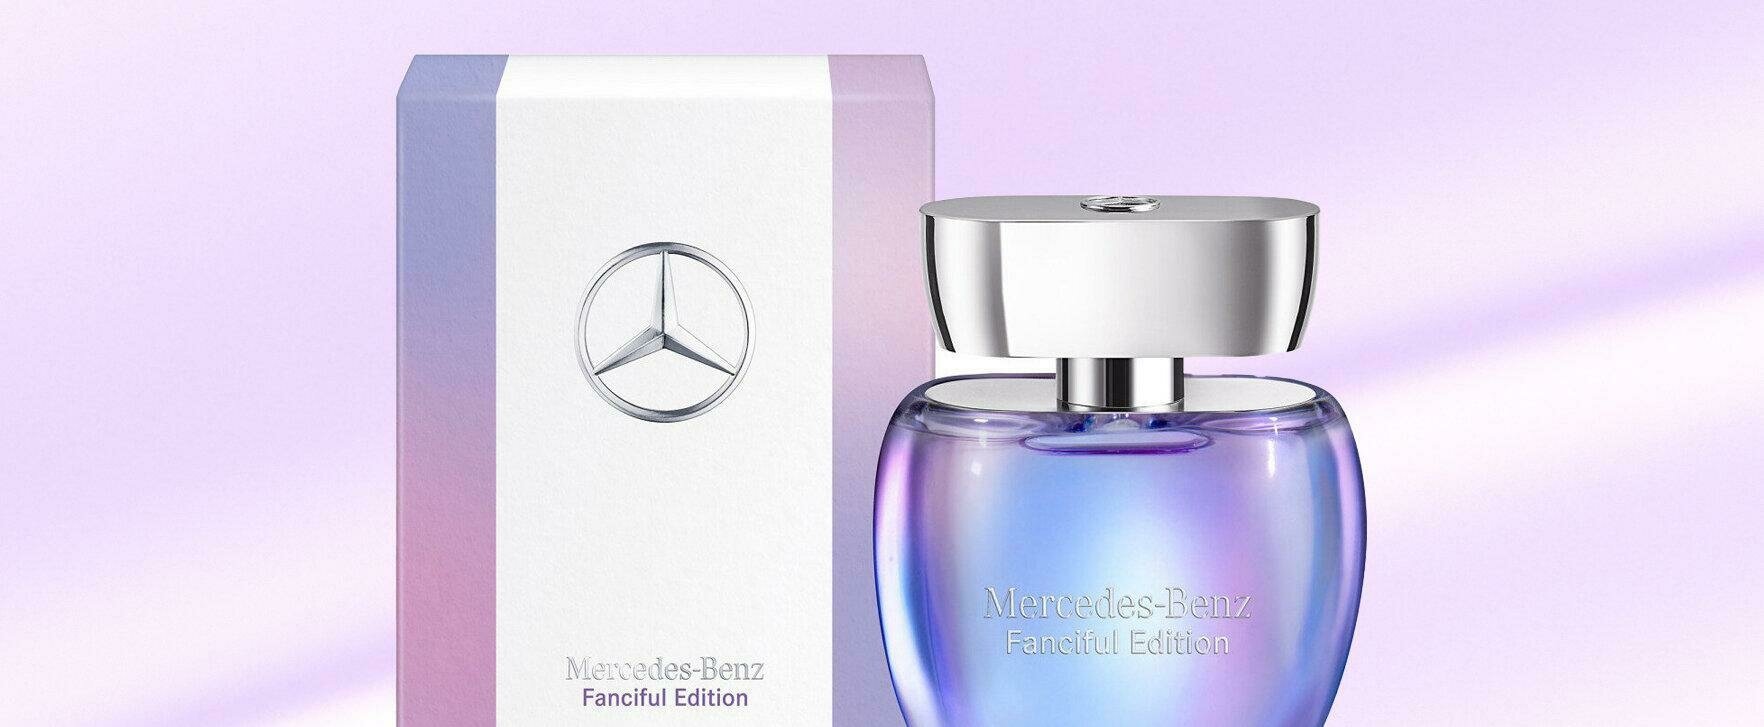 An Ode to Glamour: The New Limited “Mercedes-Benz Fanciful Edition”